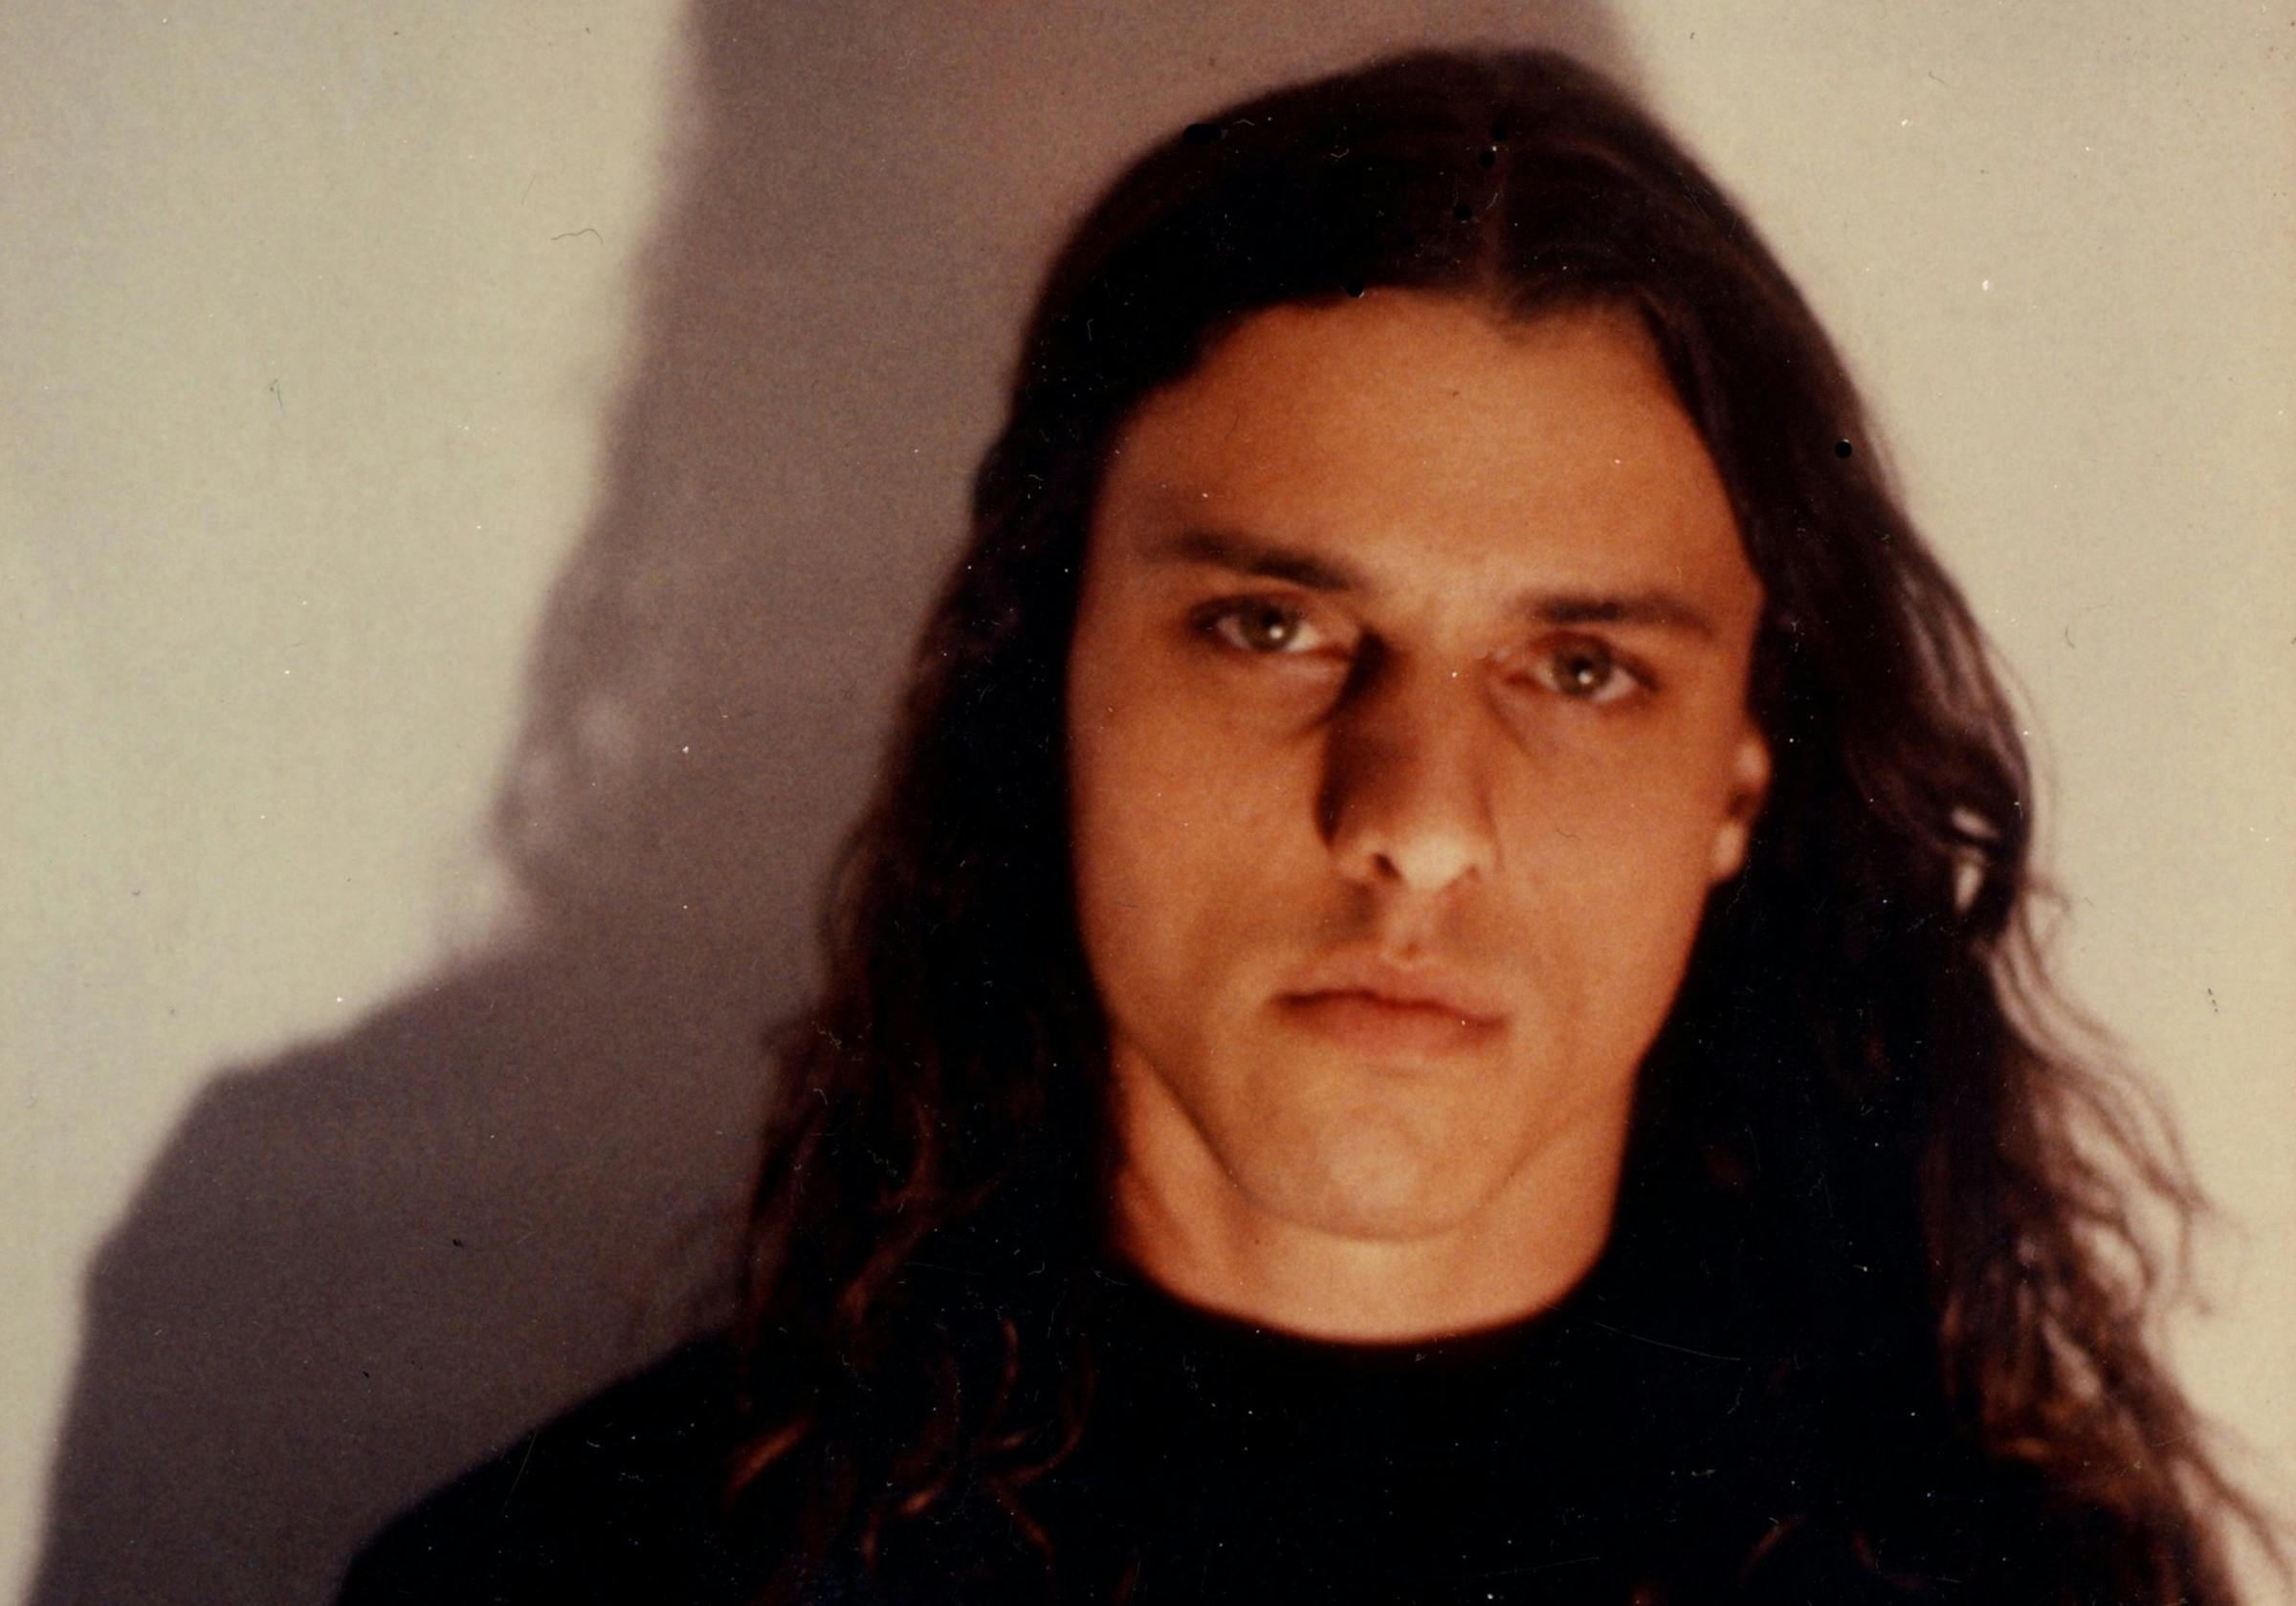 Life After Death: The romantic legacy of Chuck Schuldiner